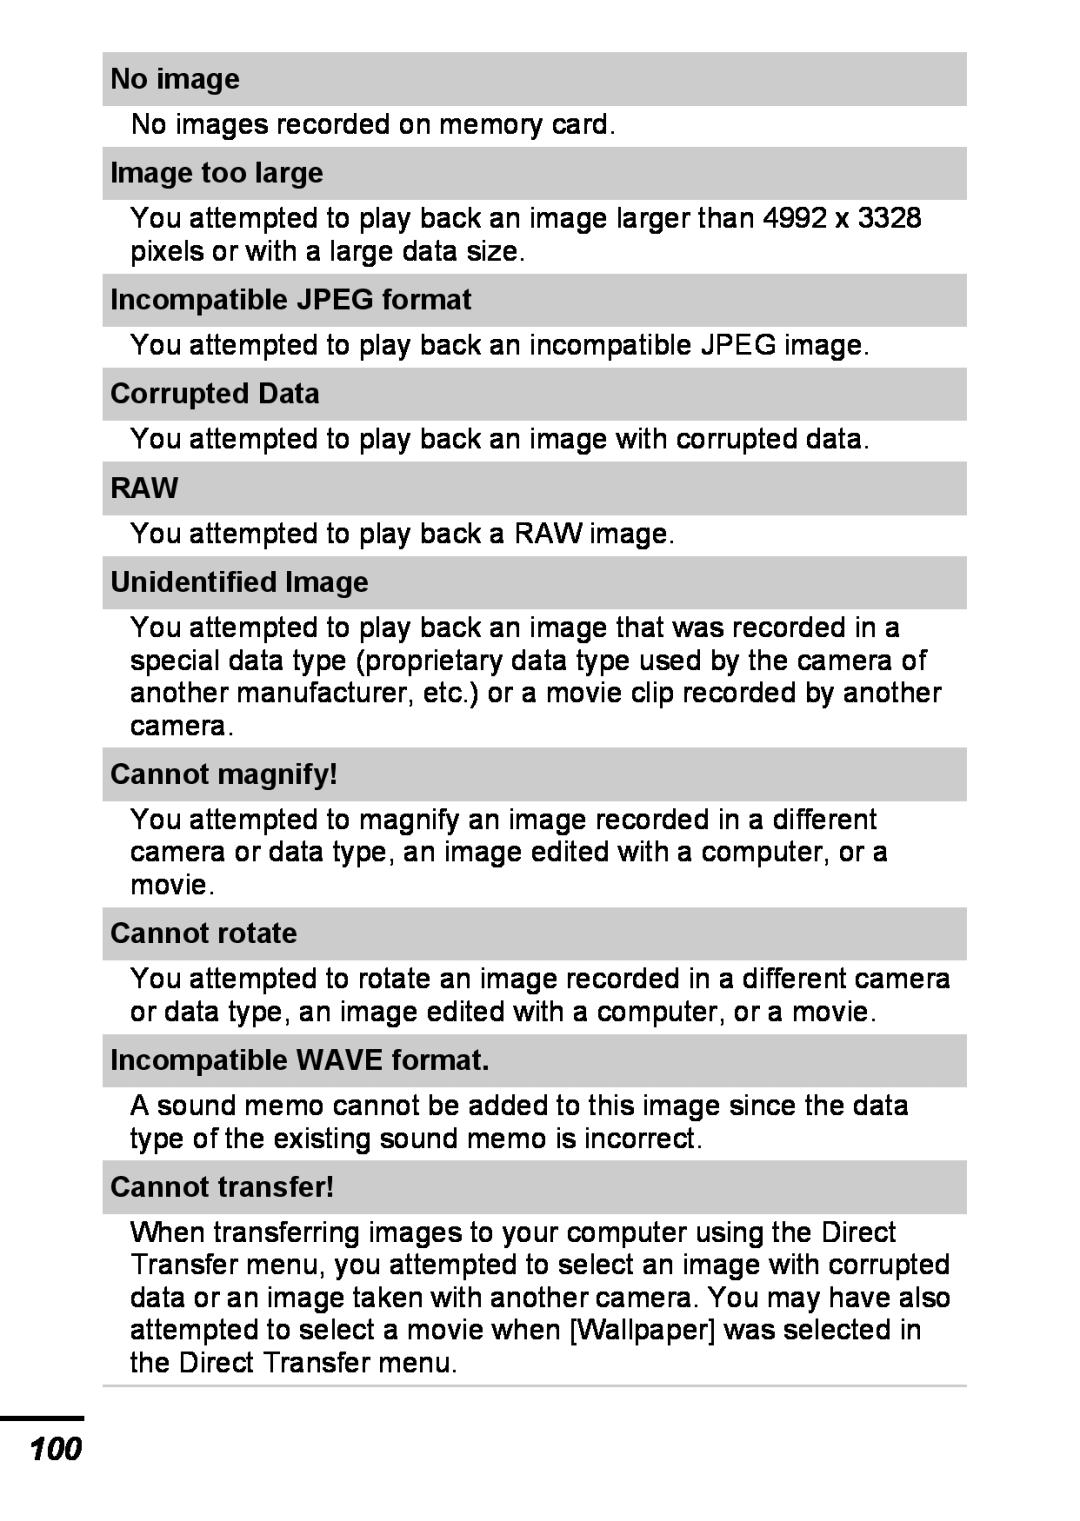 Canon A540 appendix No image, Image too large, Incompatible JPEG format, Corrupted Data, Unidentified Image, Cannot magnify 